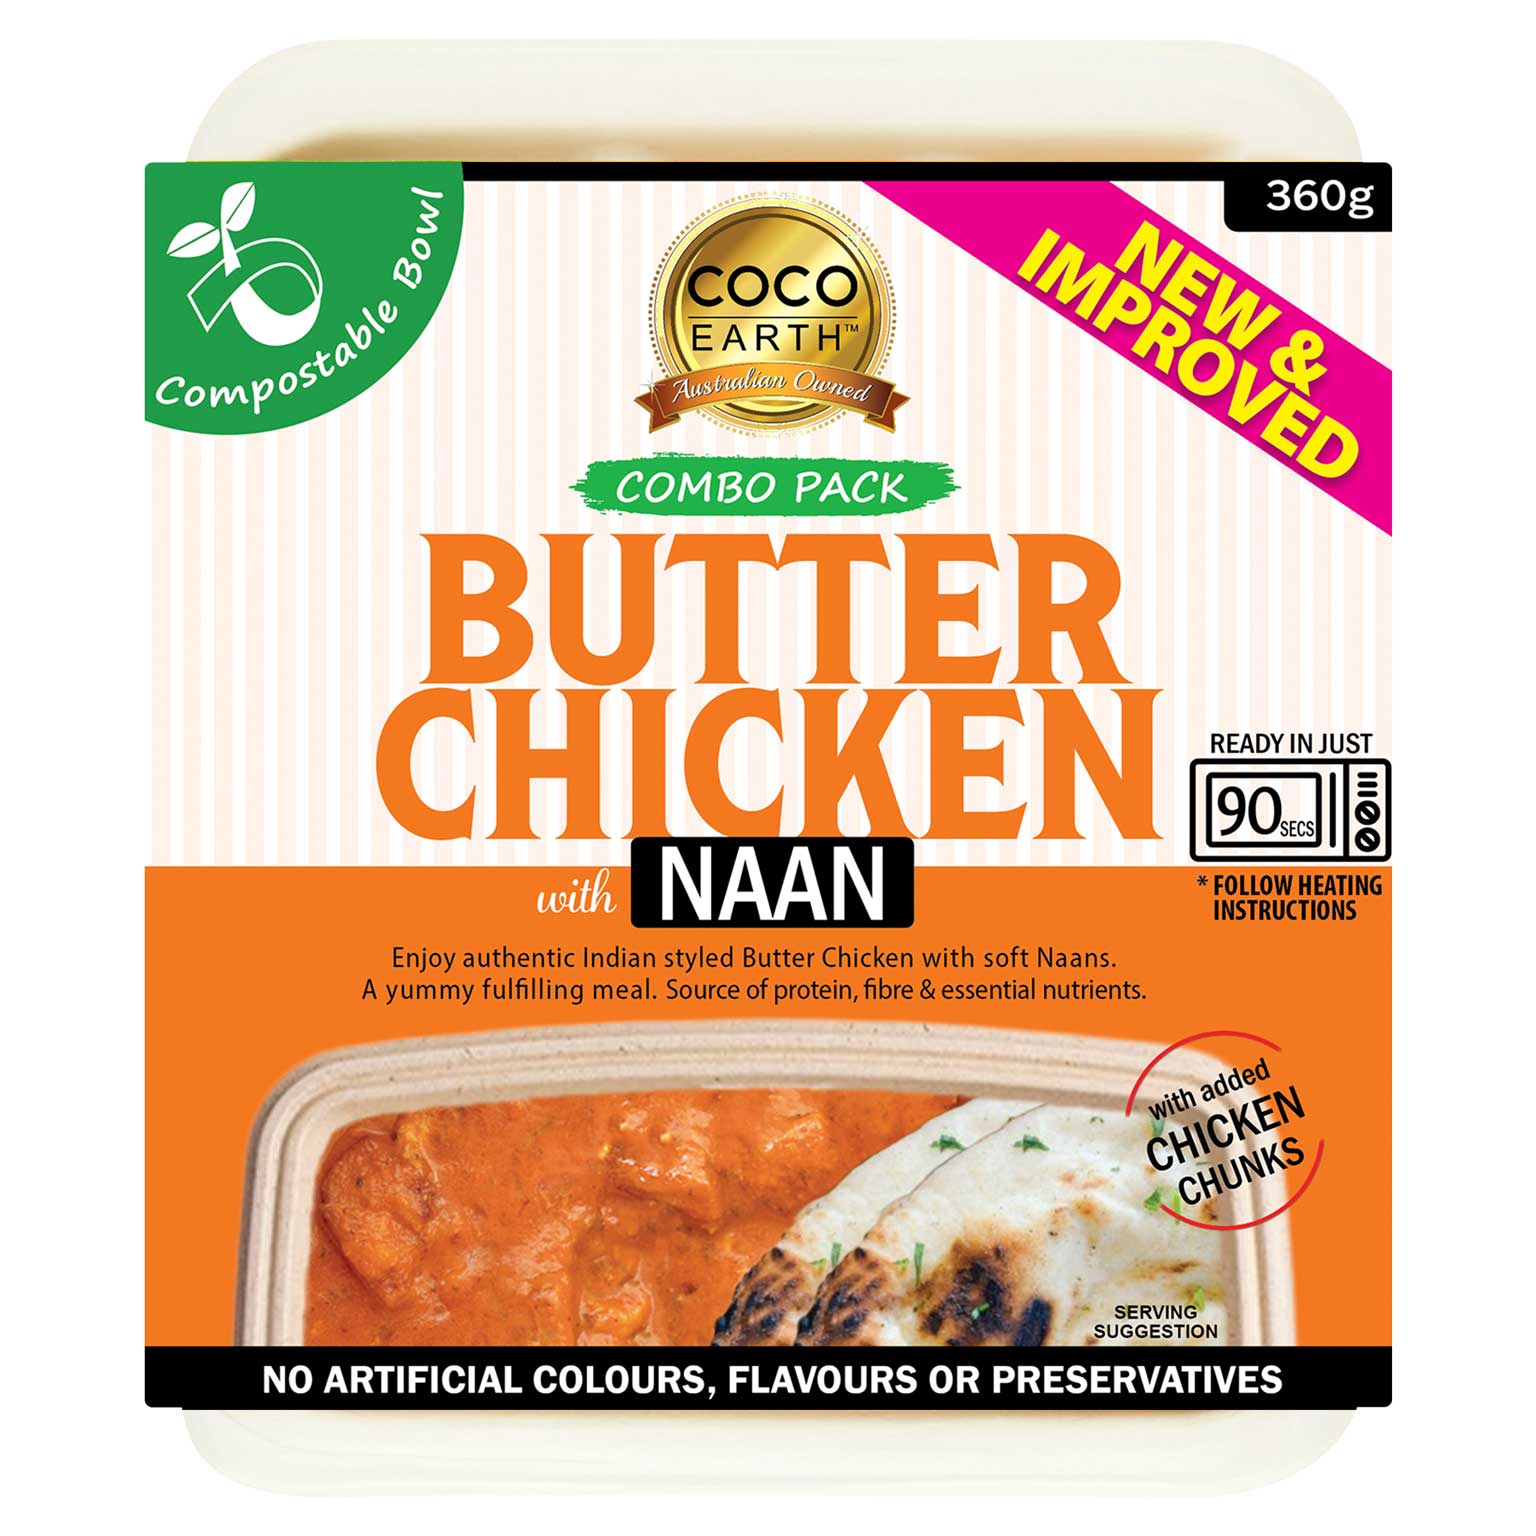 Butter Chicken with Naan 360g (Compostable Bowl)